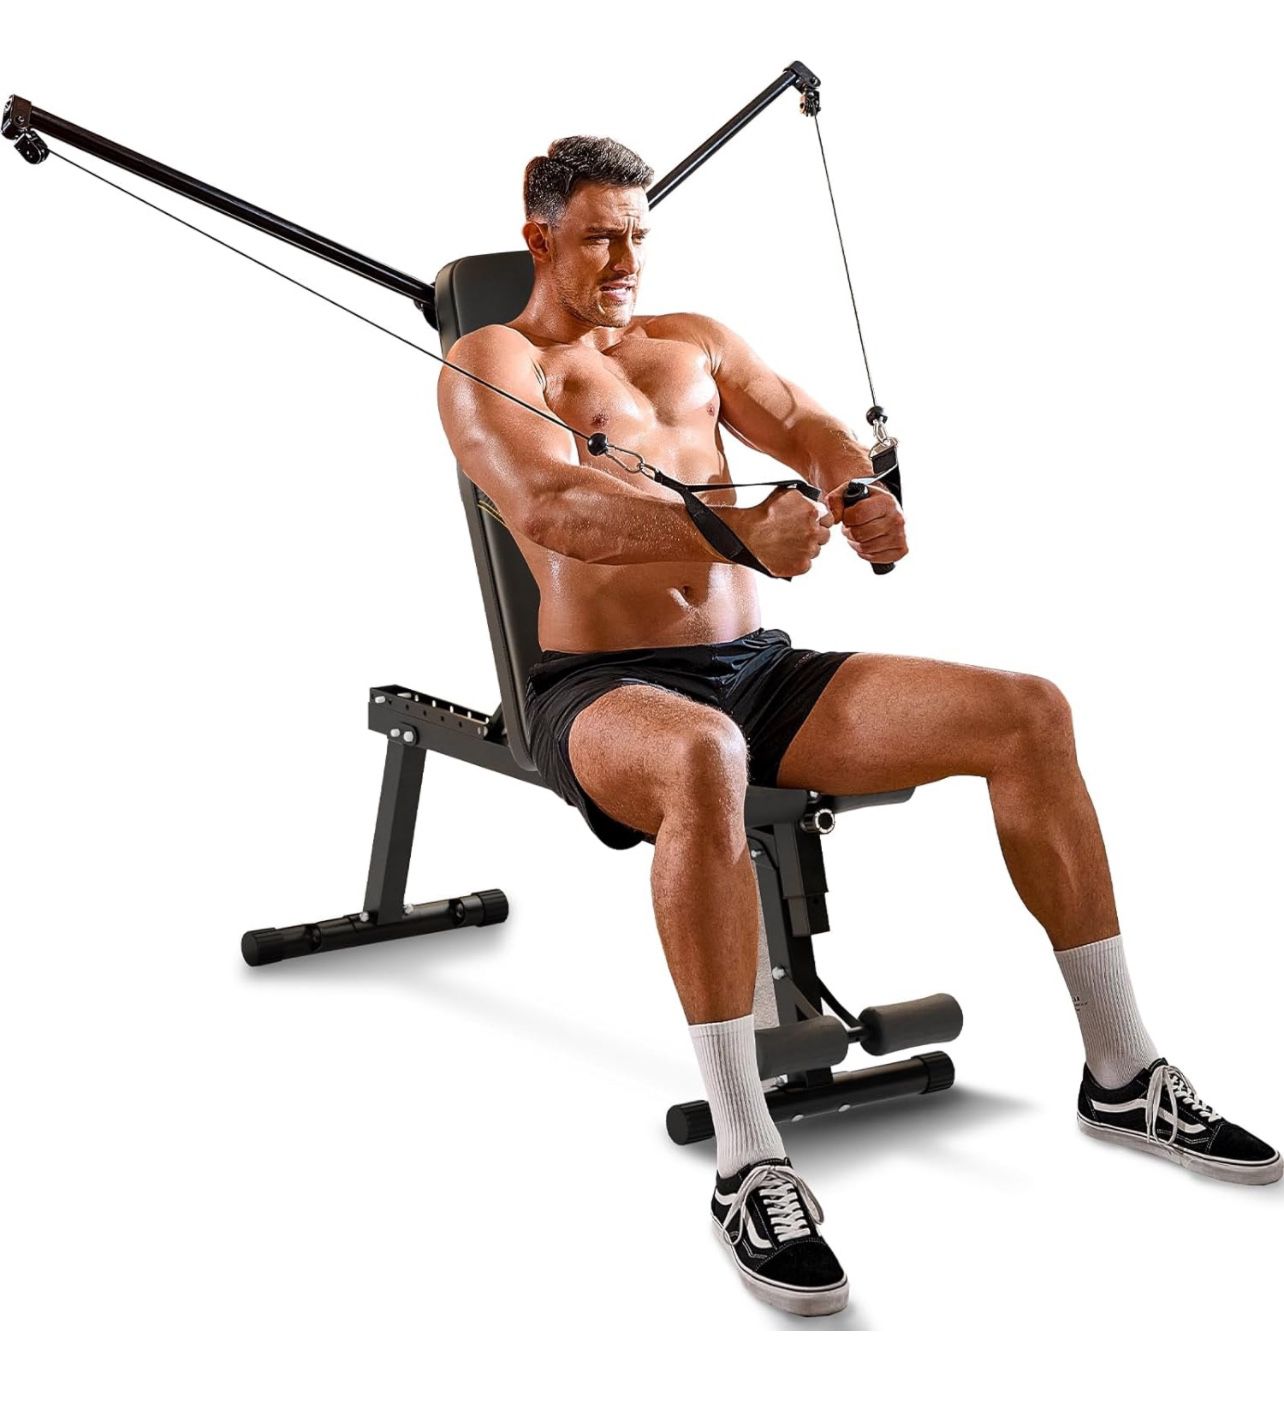 Adjustable Weight Bench Press set for Full-body Workout